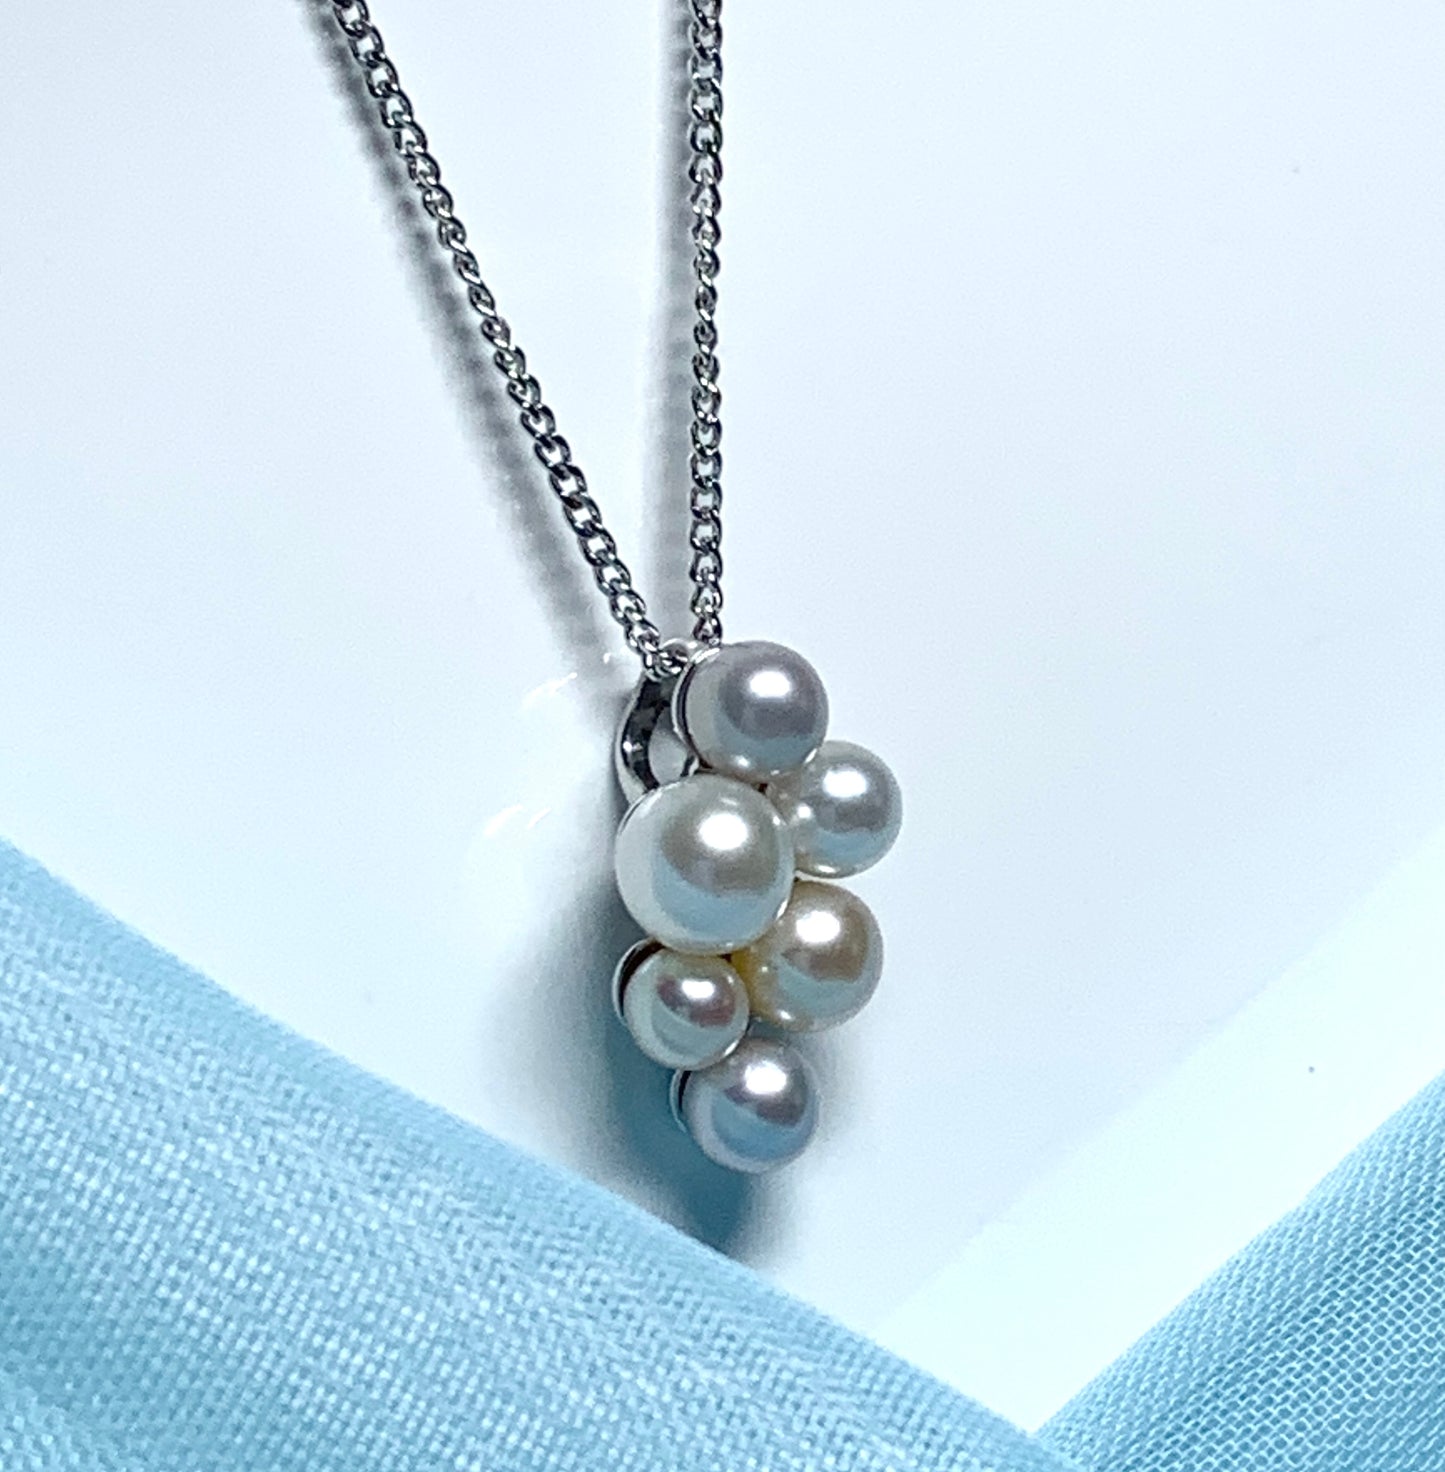 Cluster pearl necklace white gold pendant